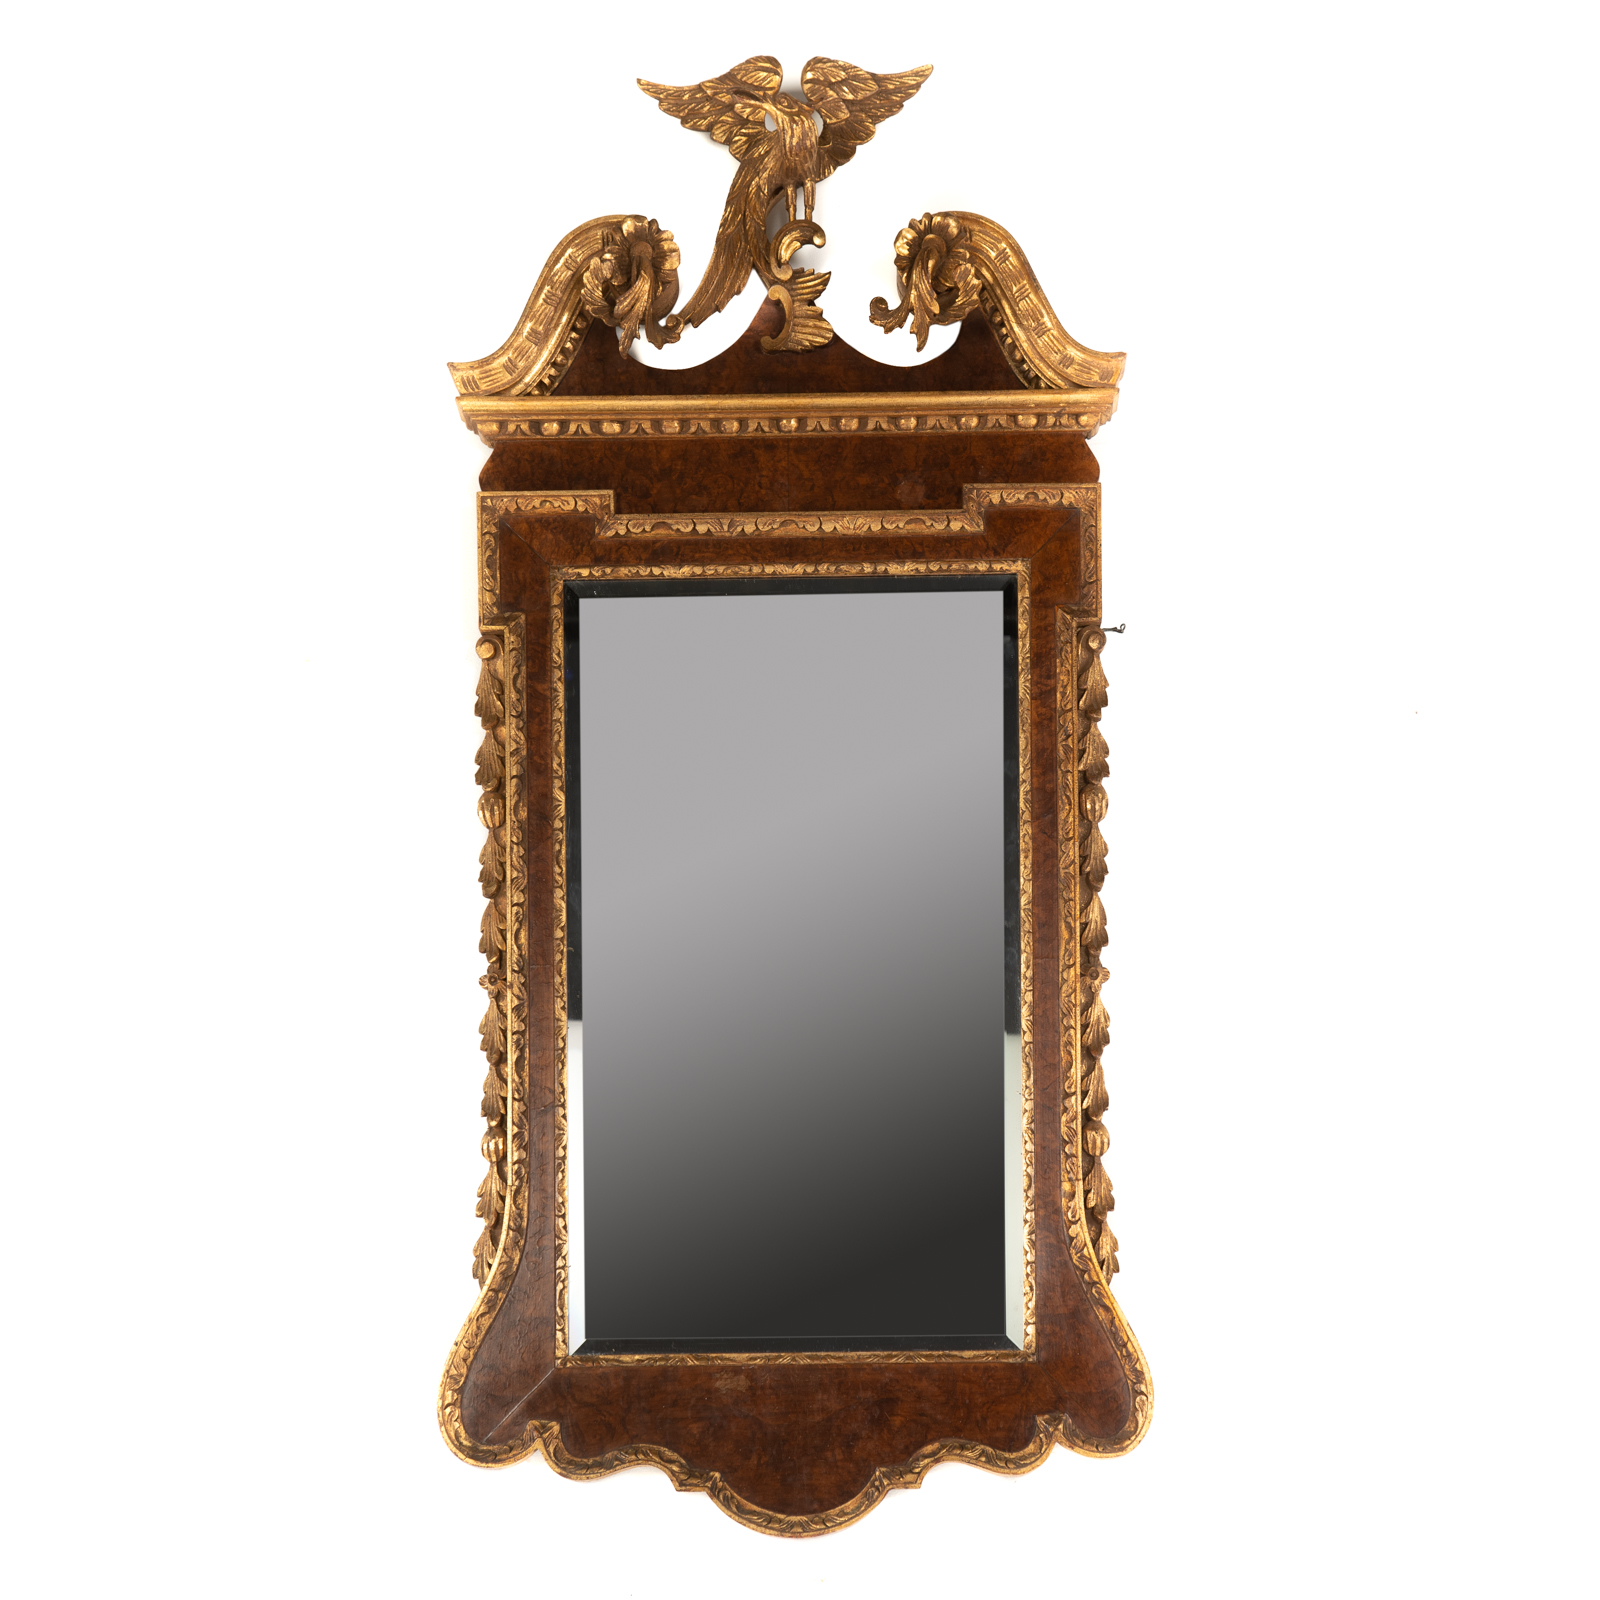 LABARGE FEDERAL STYLE GILTWOOD 287590